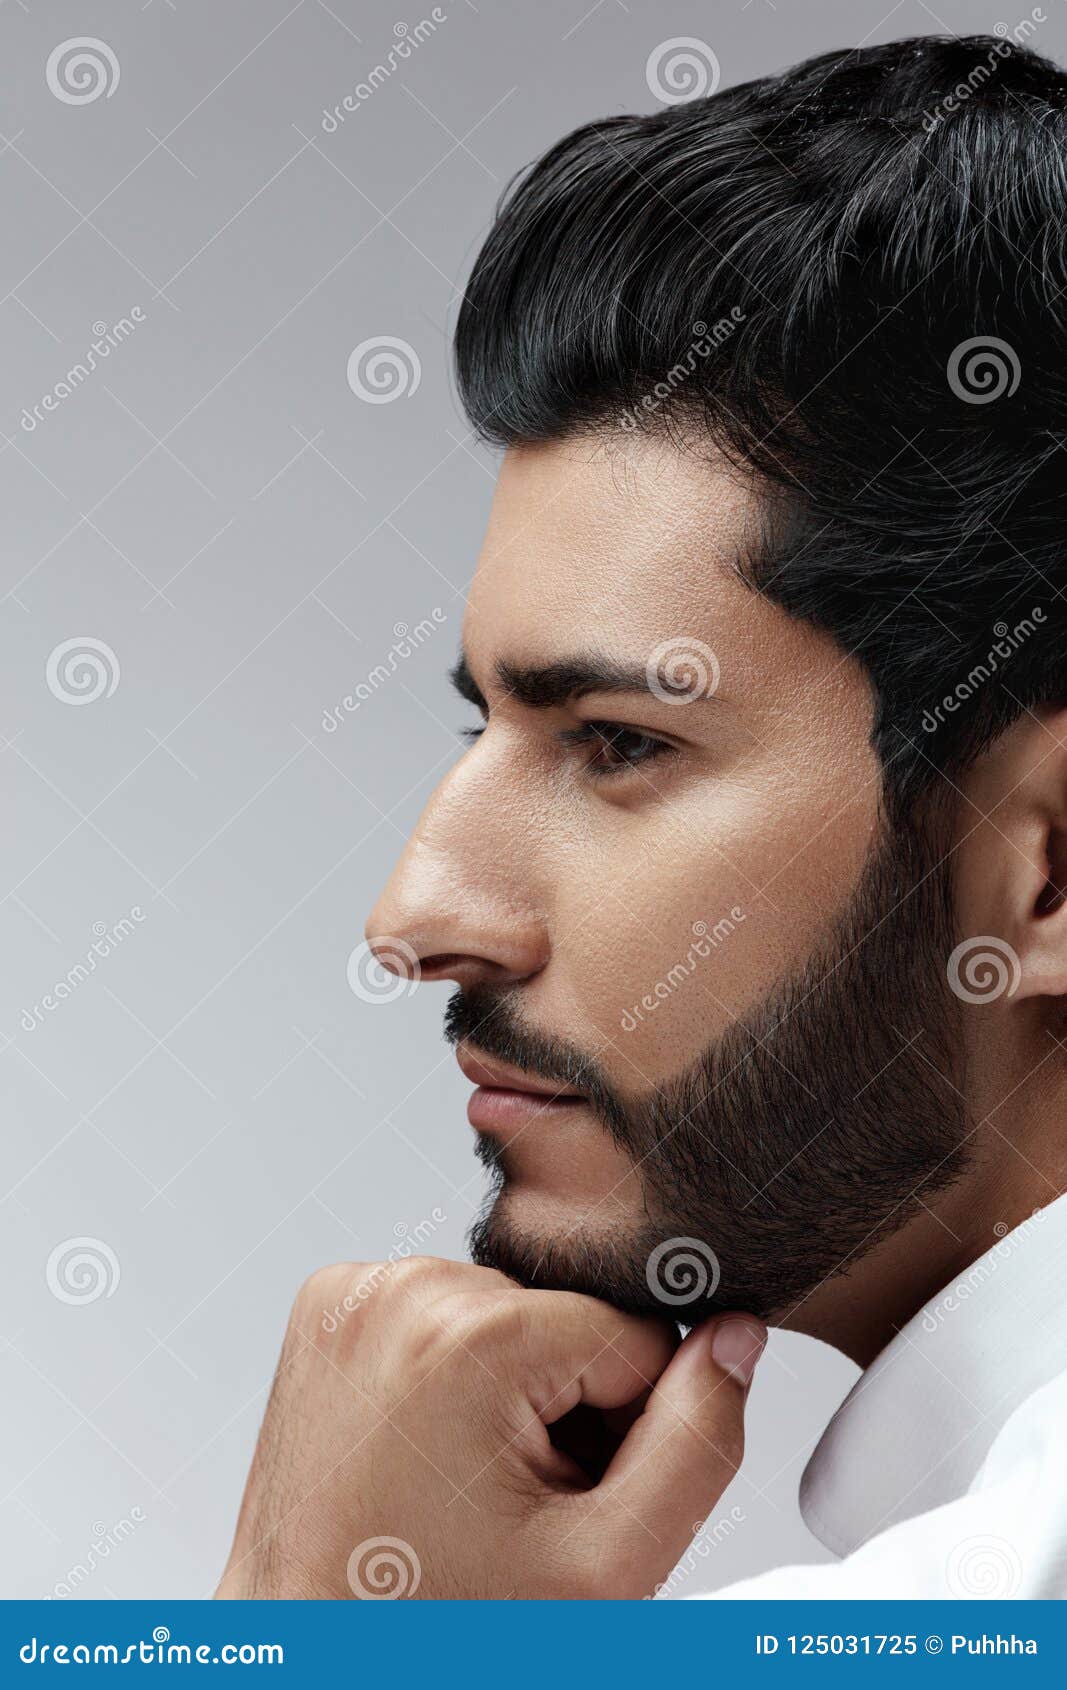 Beauty. Man with Hair Style and Beard Portrait Stock Image - Image of  hairstyle, care: 125031725